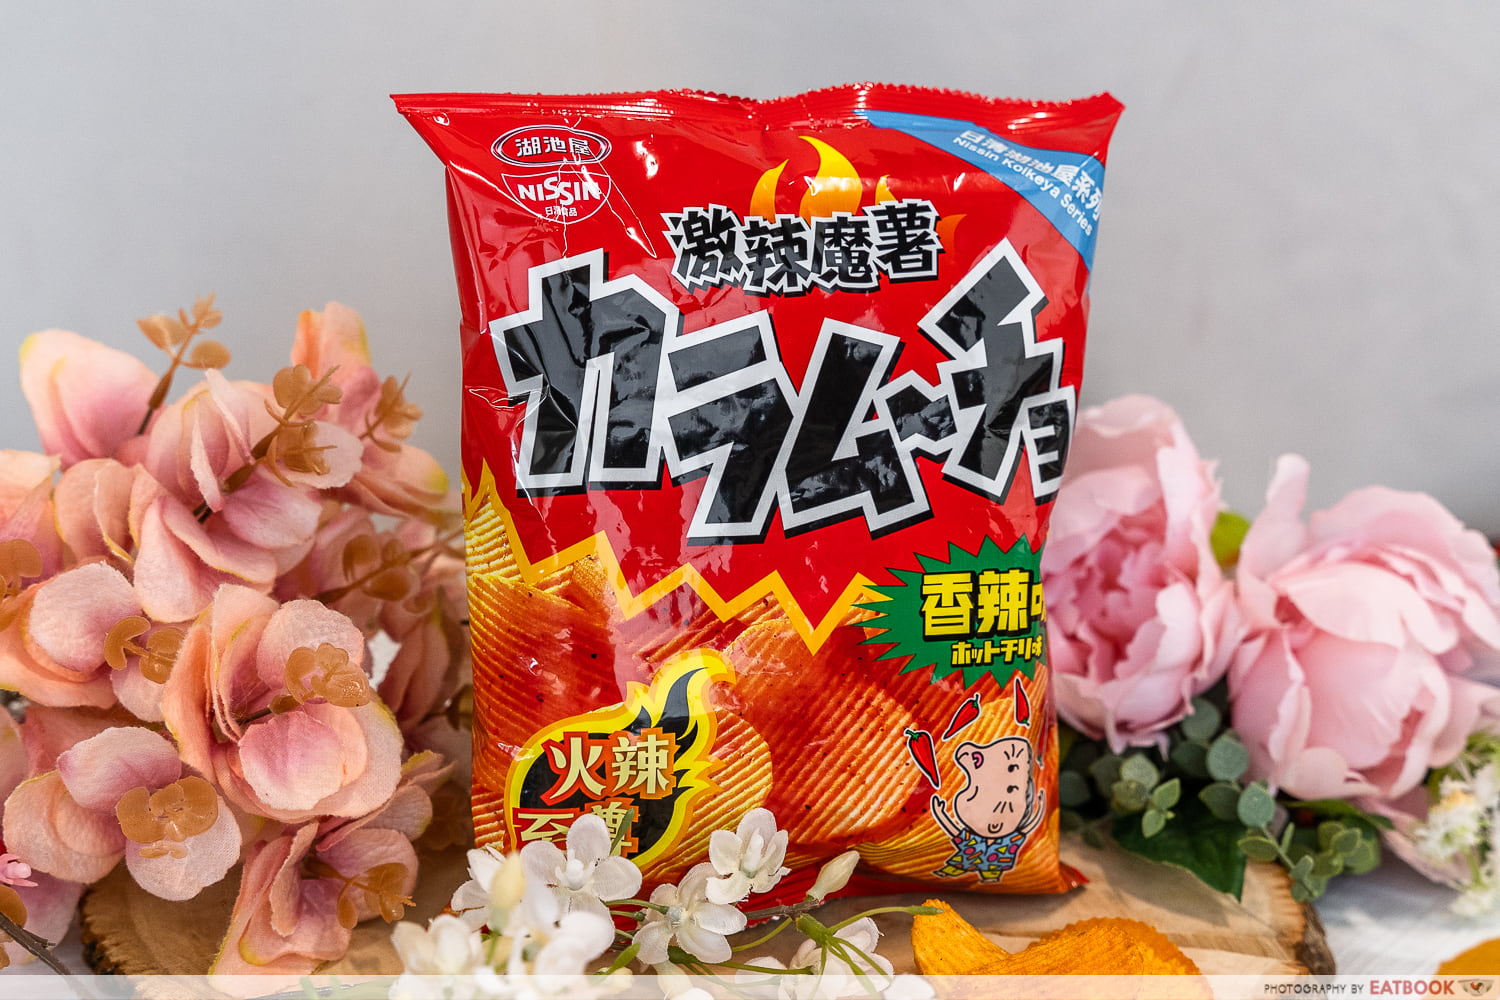 nissin spicy potato chips